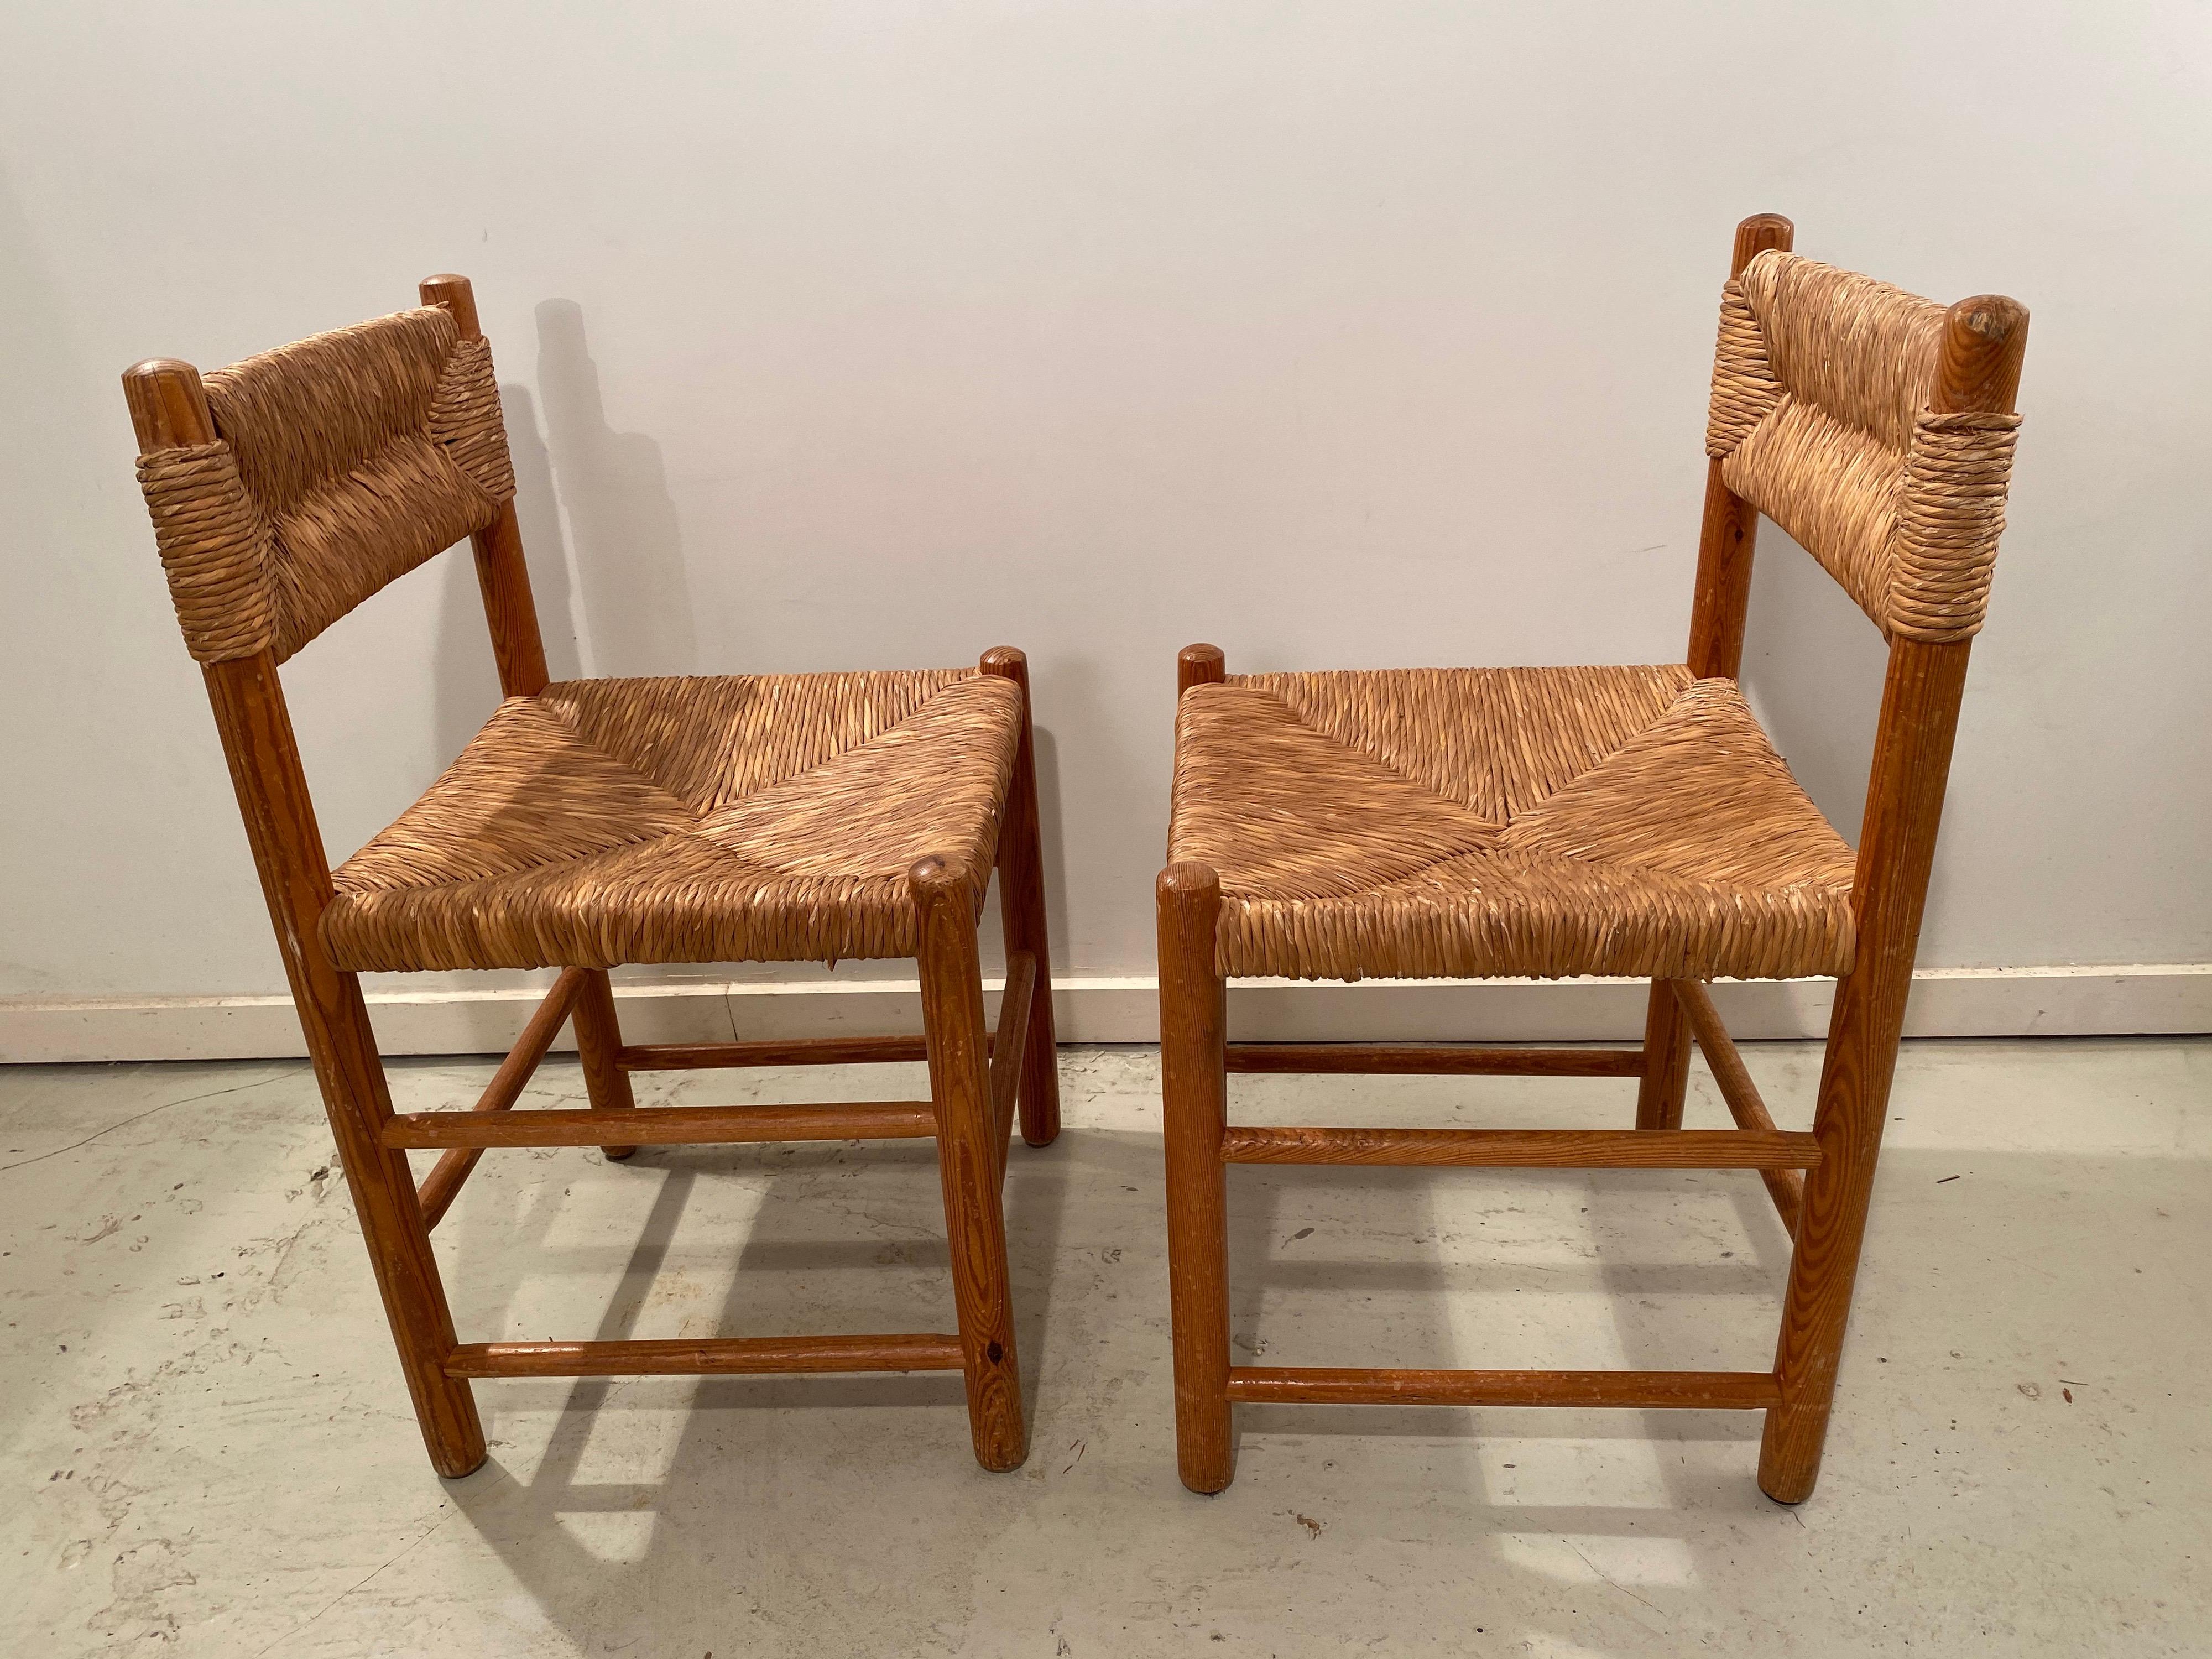 Mid-20th Century Pair of Wicker Dordogne Chairs by Charlotte Perriand for Sentou, 1950s For Sale